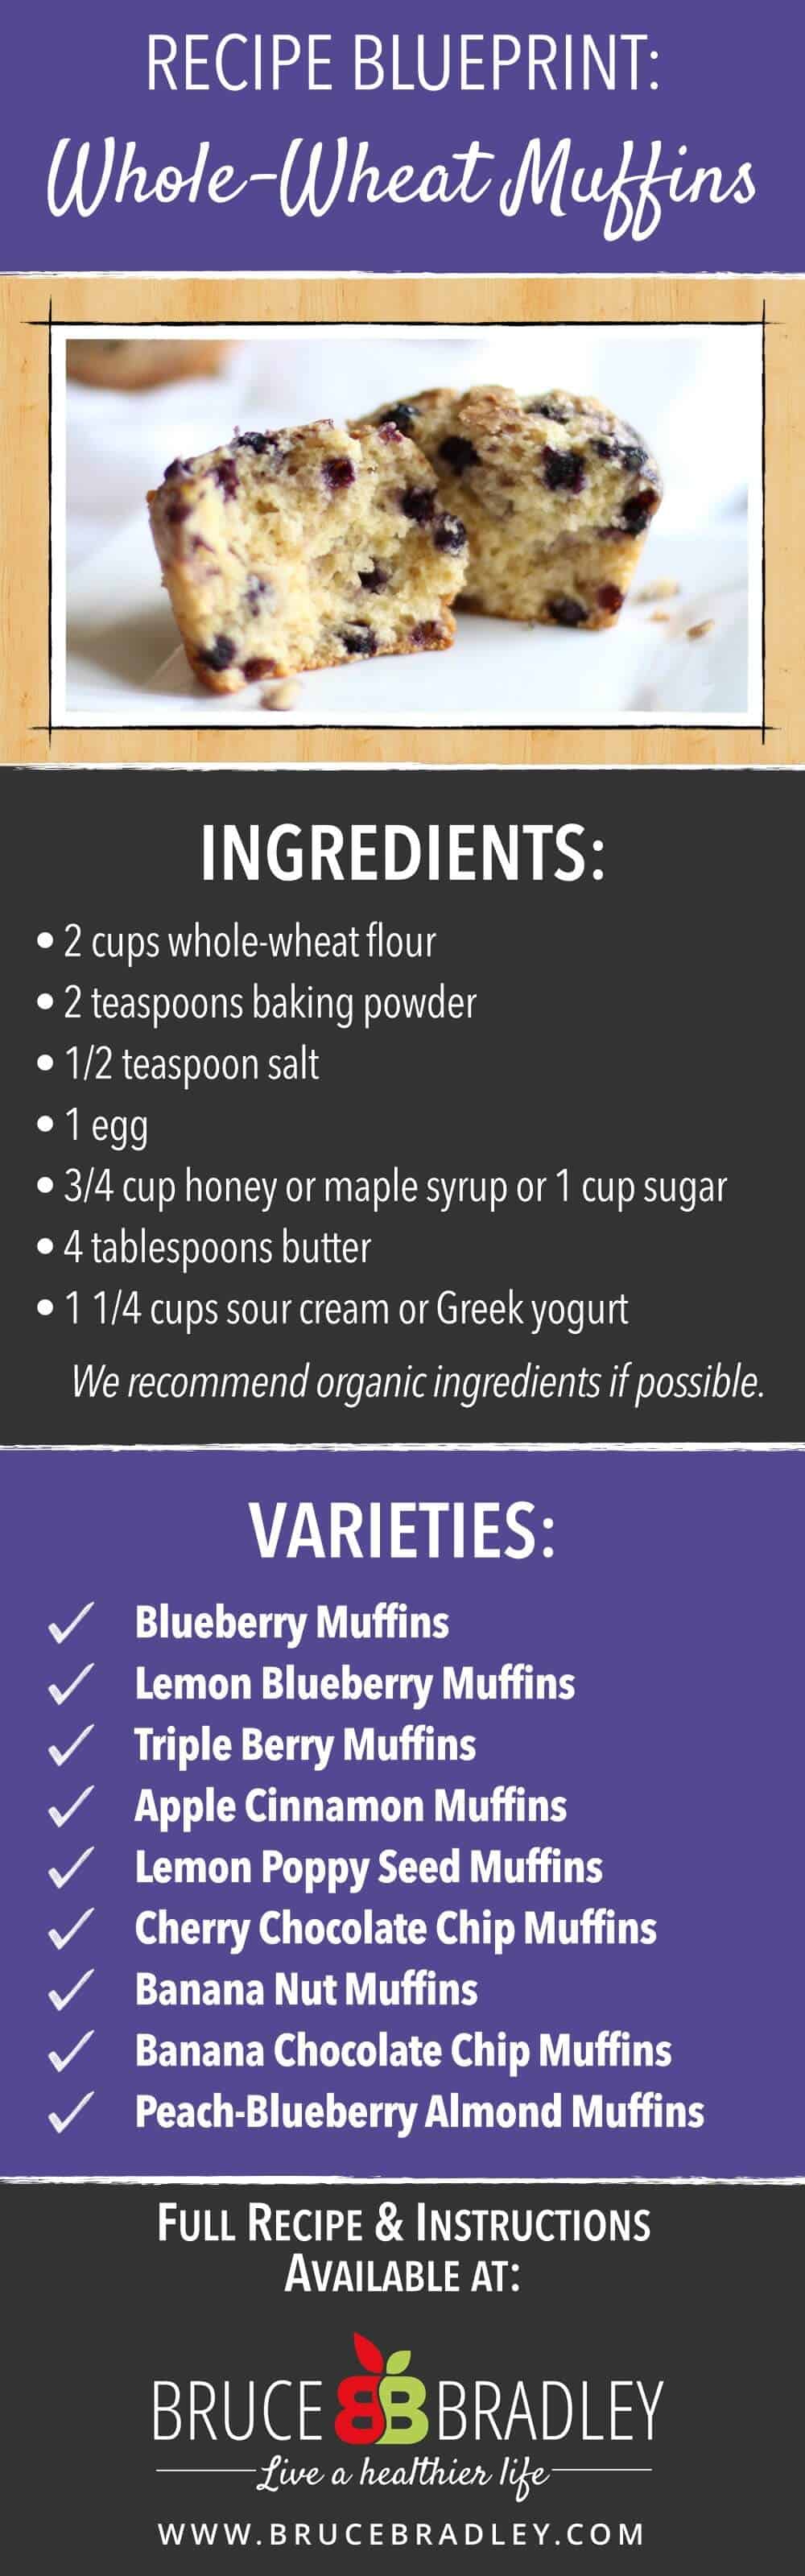 Bruce Bradley'S Whole-Wheat Muffin Recipe Blueprint Is The Perfect Base For All Your Favorite Kinds Of Muffins And Uses Real Ingredients!